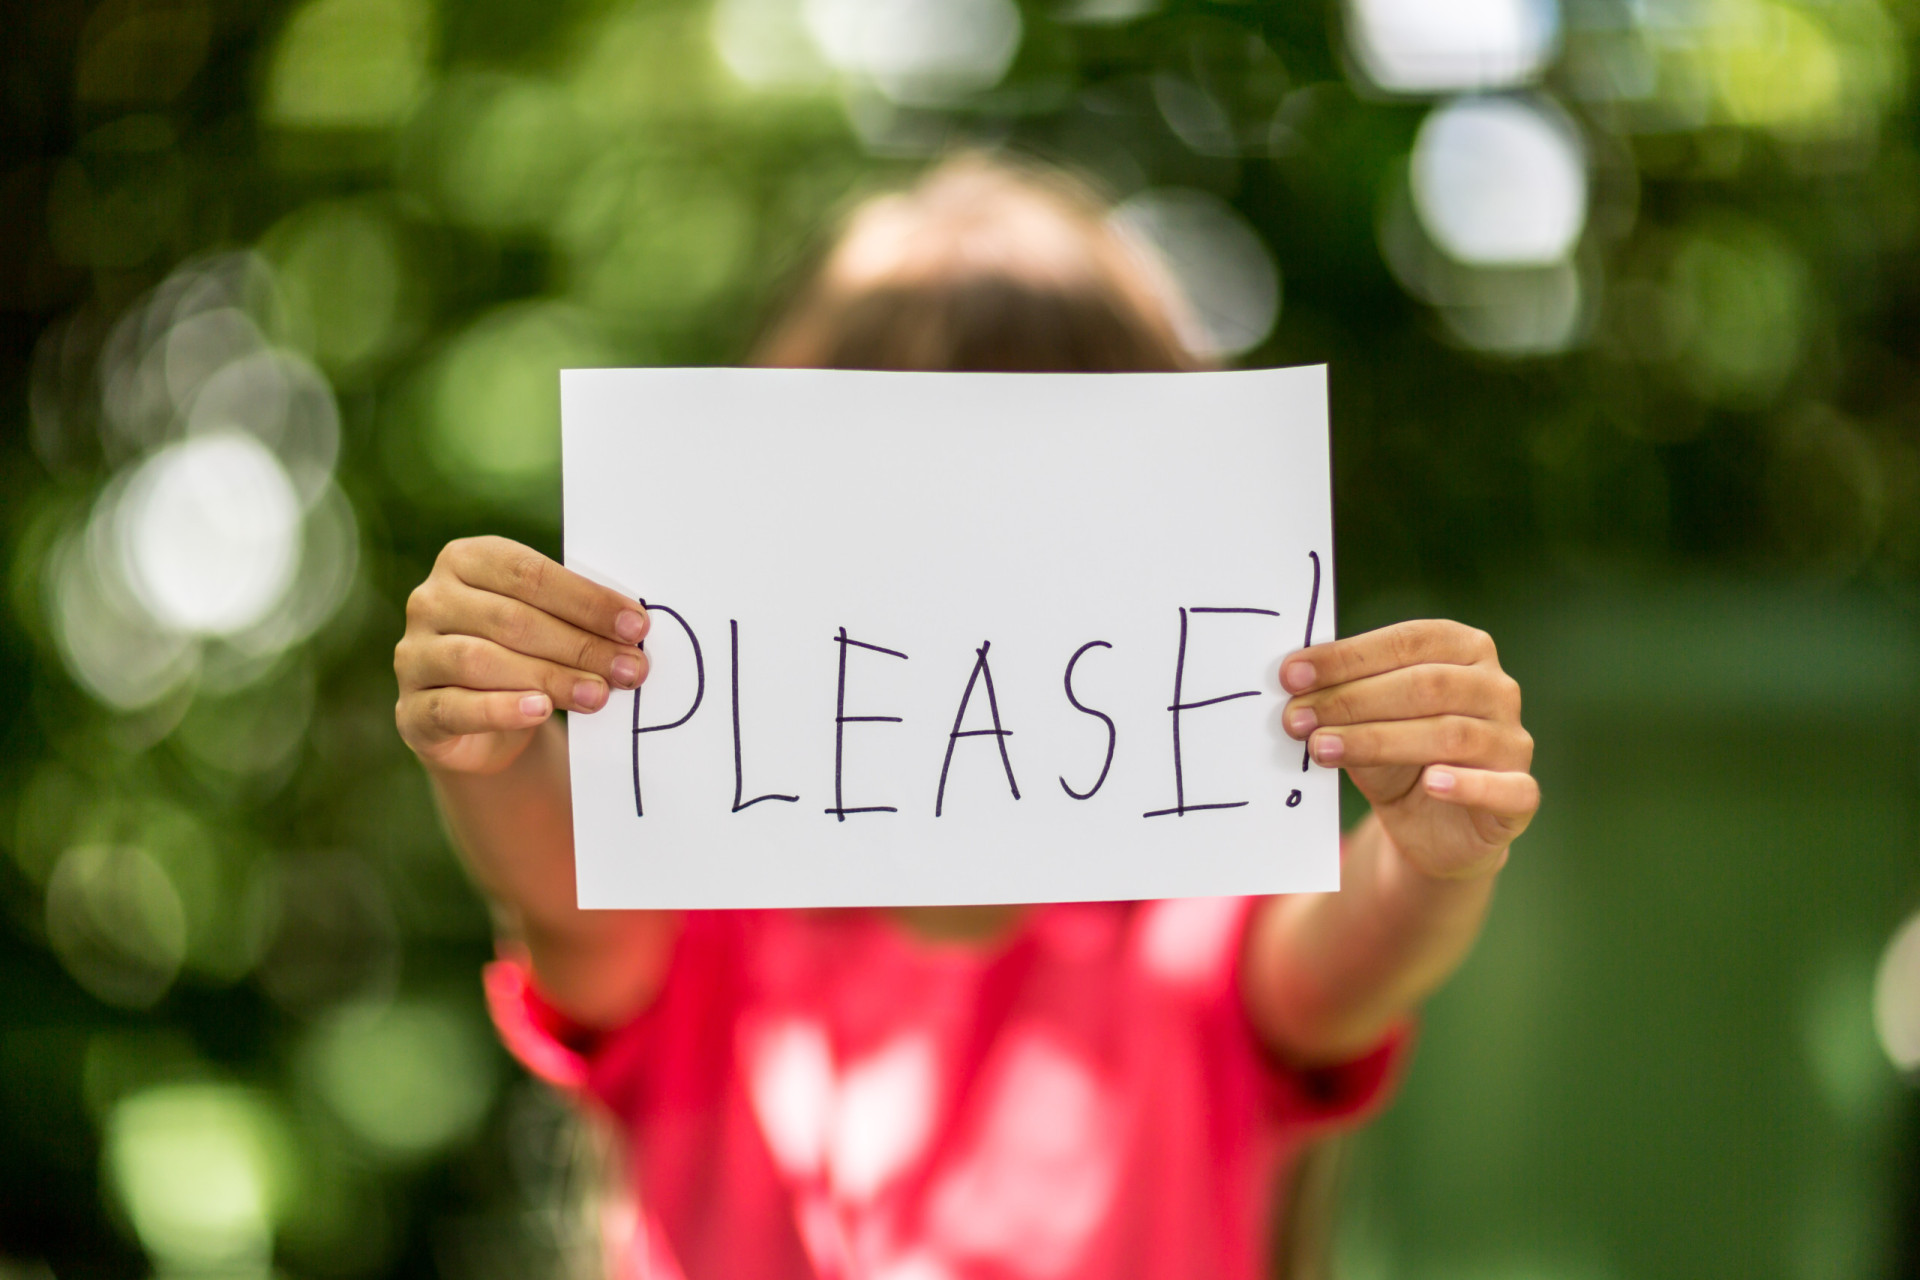 <p>Teaching kids to say "please" and "thank you" is like giving them the keys to the world of politeness. These small words carry big meanings, making interactions more pleasant and respectful.</p><p><a href="https://www.msn.com/en-us/community/channel/vid-7xx8mnucu55yw63we9va2gwr7uihbxwc68fxqp25x6tg4ftibpra?cvid=94631541bc0f4f89bfd59158d696ad7e">Follow us and access great exclusive content every day</a></p>